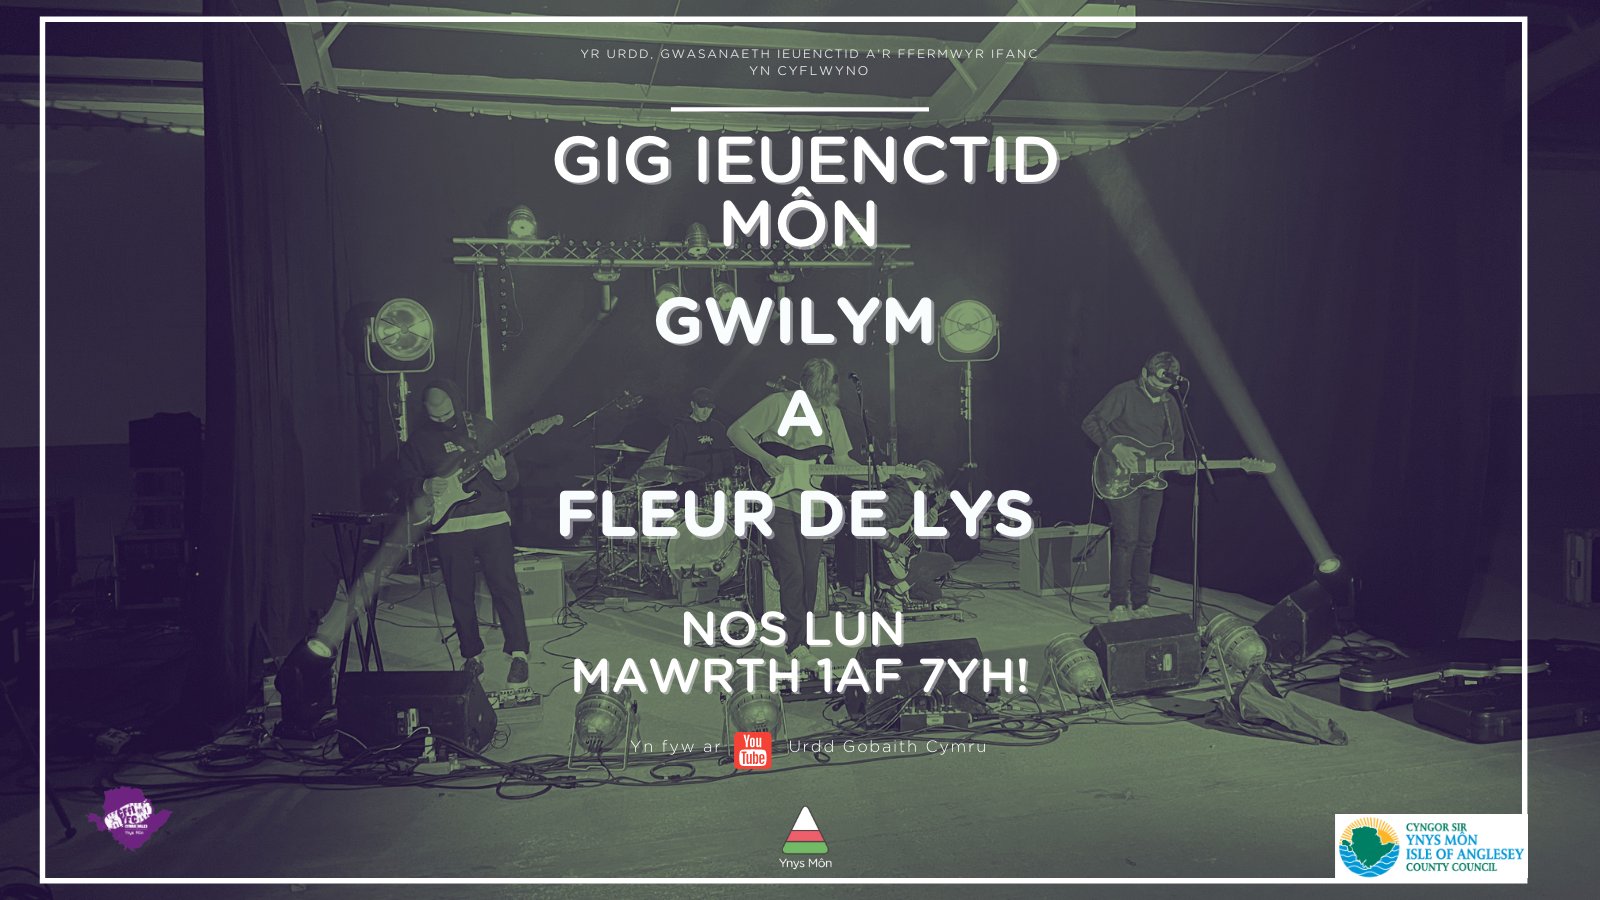 Youth gig with bands Gwilym and Fleur De Lys